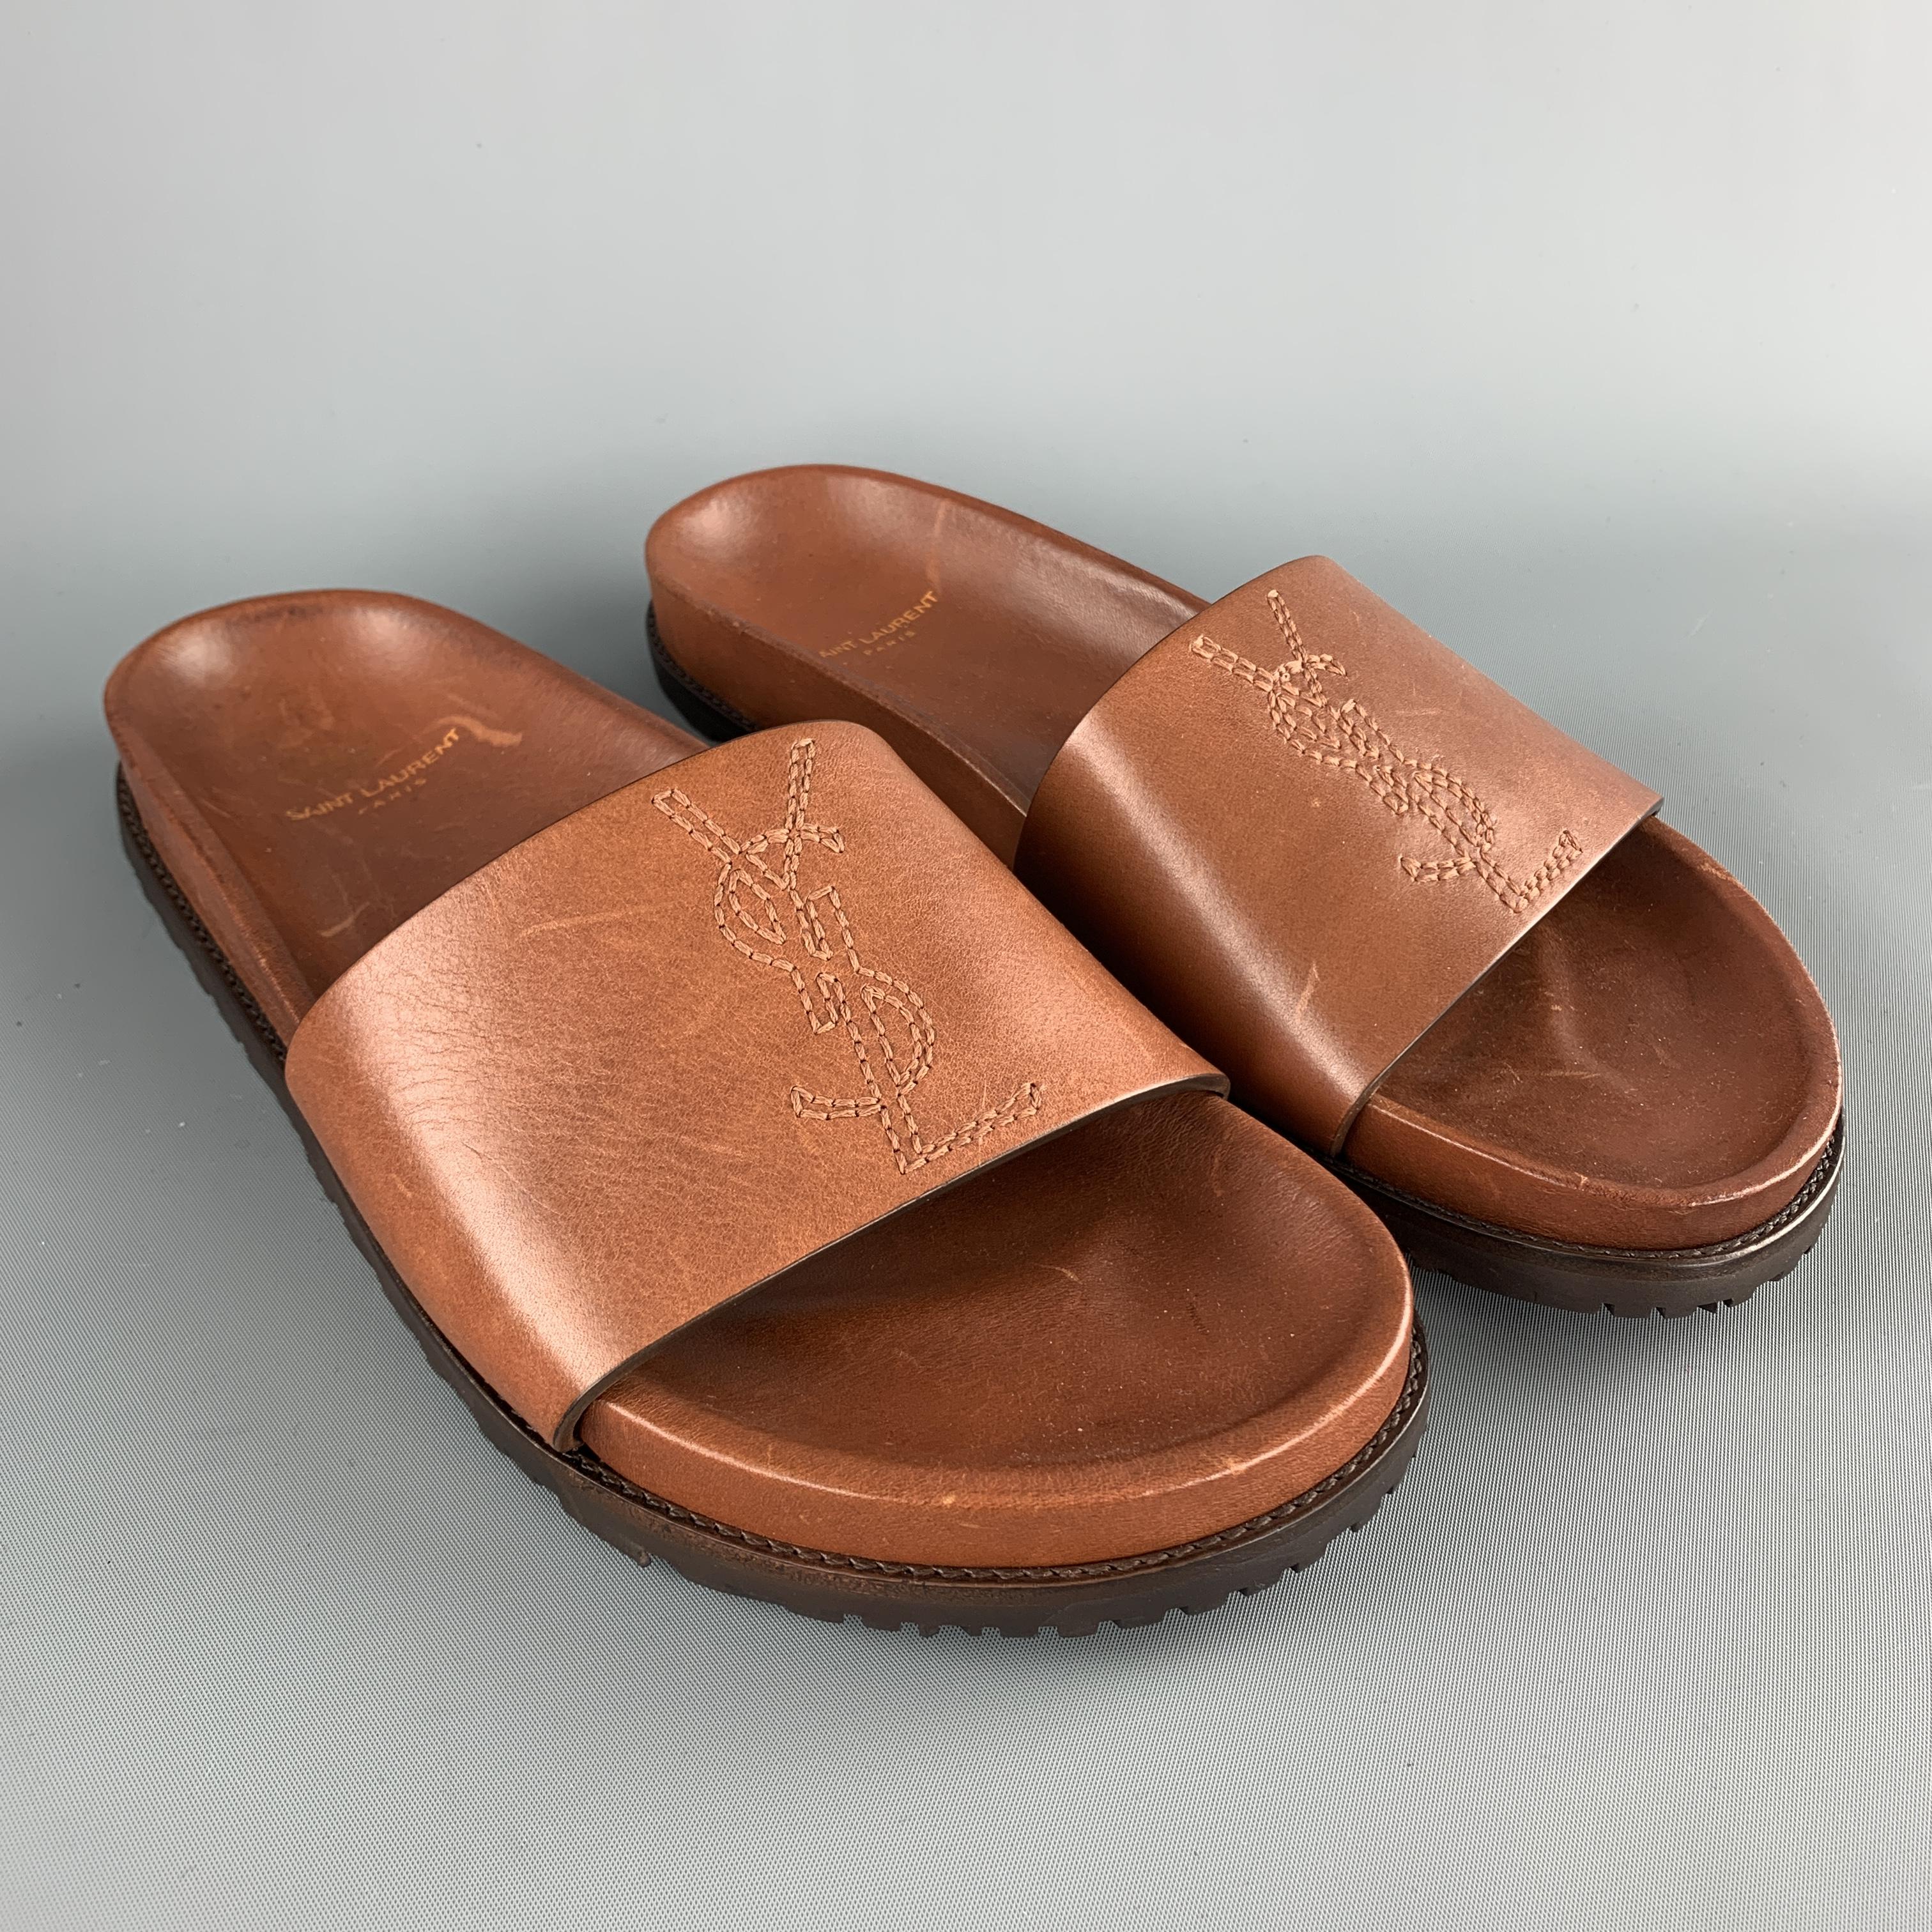 SAINT LAURENT slide sandals come in tan cognac leather with a thick YSL logo embroidered strap. Brand new with minor imperfections from storage. As-is. Made in Italy.

New in Box.
Marked: IT 41

Measurements:

Outsole: 11 x 4.25 in.